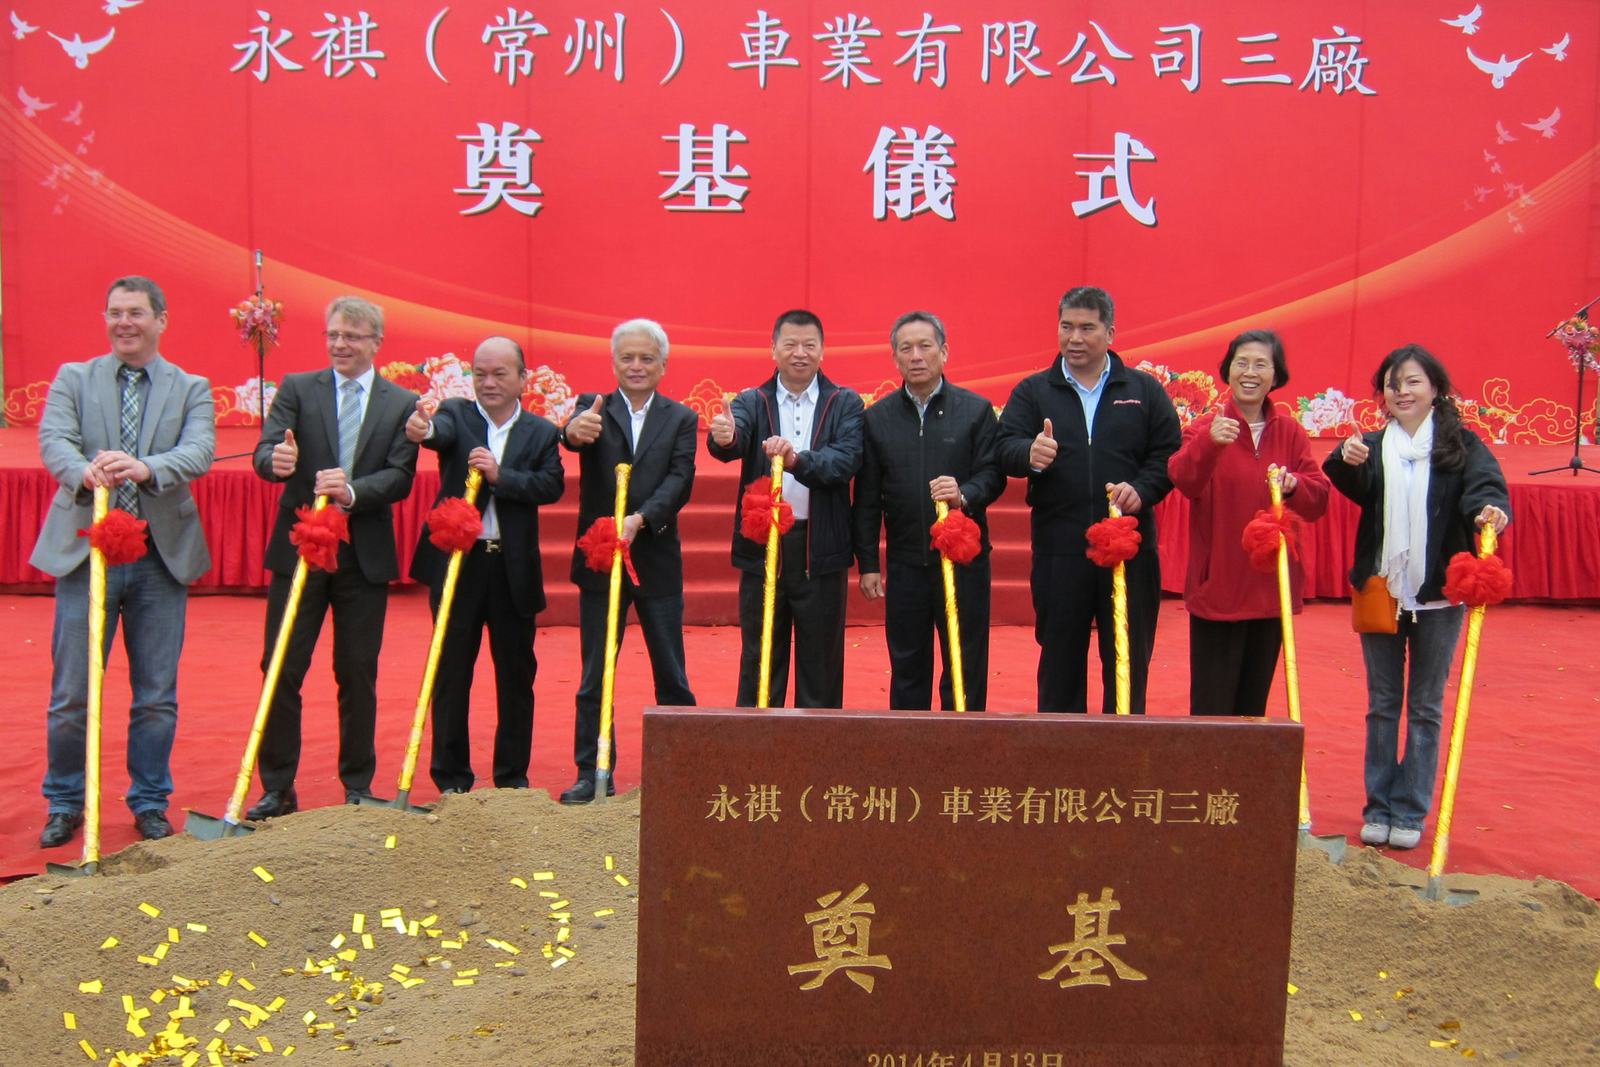 Last April Ming Cycle celebrated with about 200 international guests the groundbreaking ceremony for its 3rd factory in China. - Photo Ming Cycle